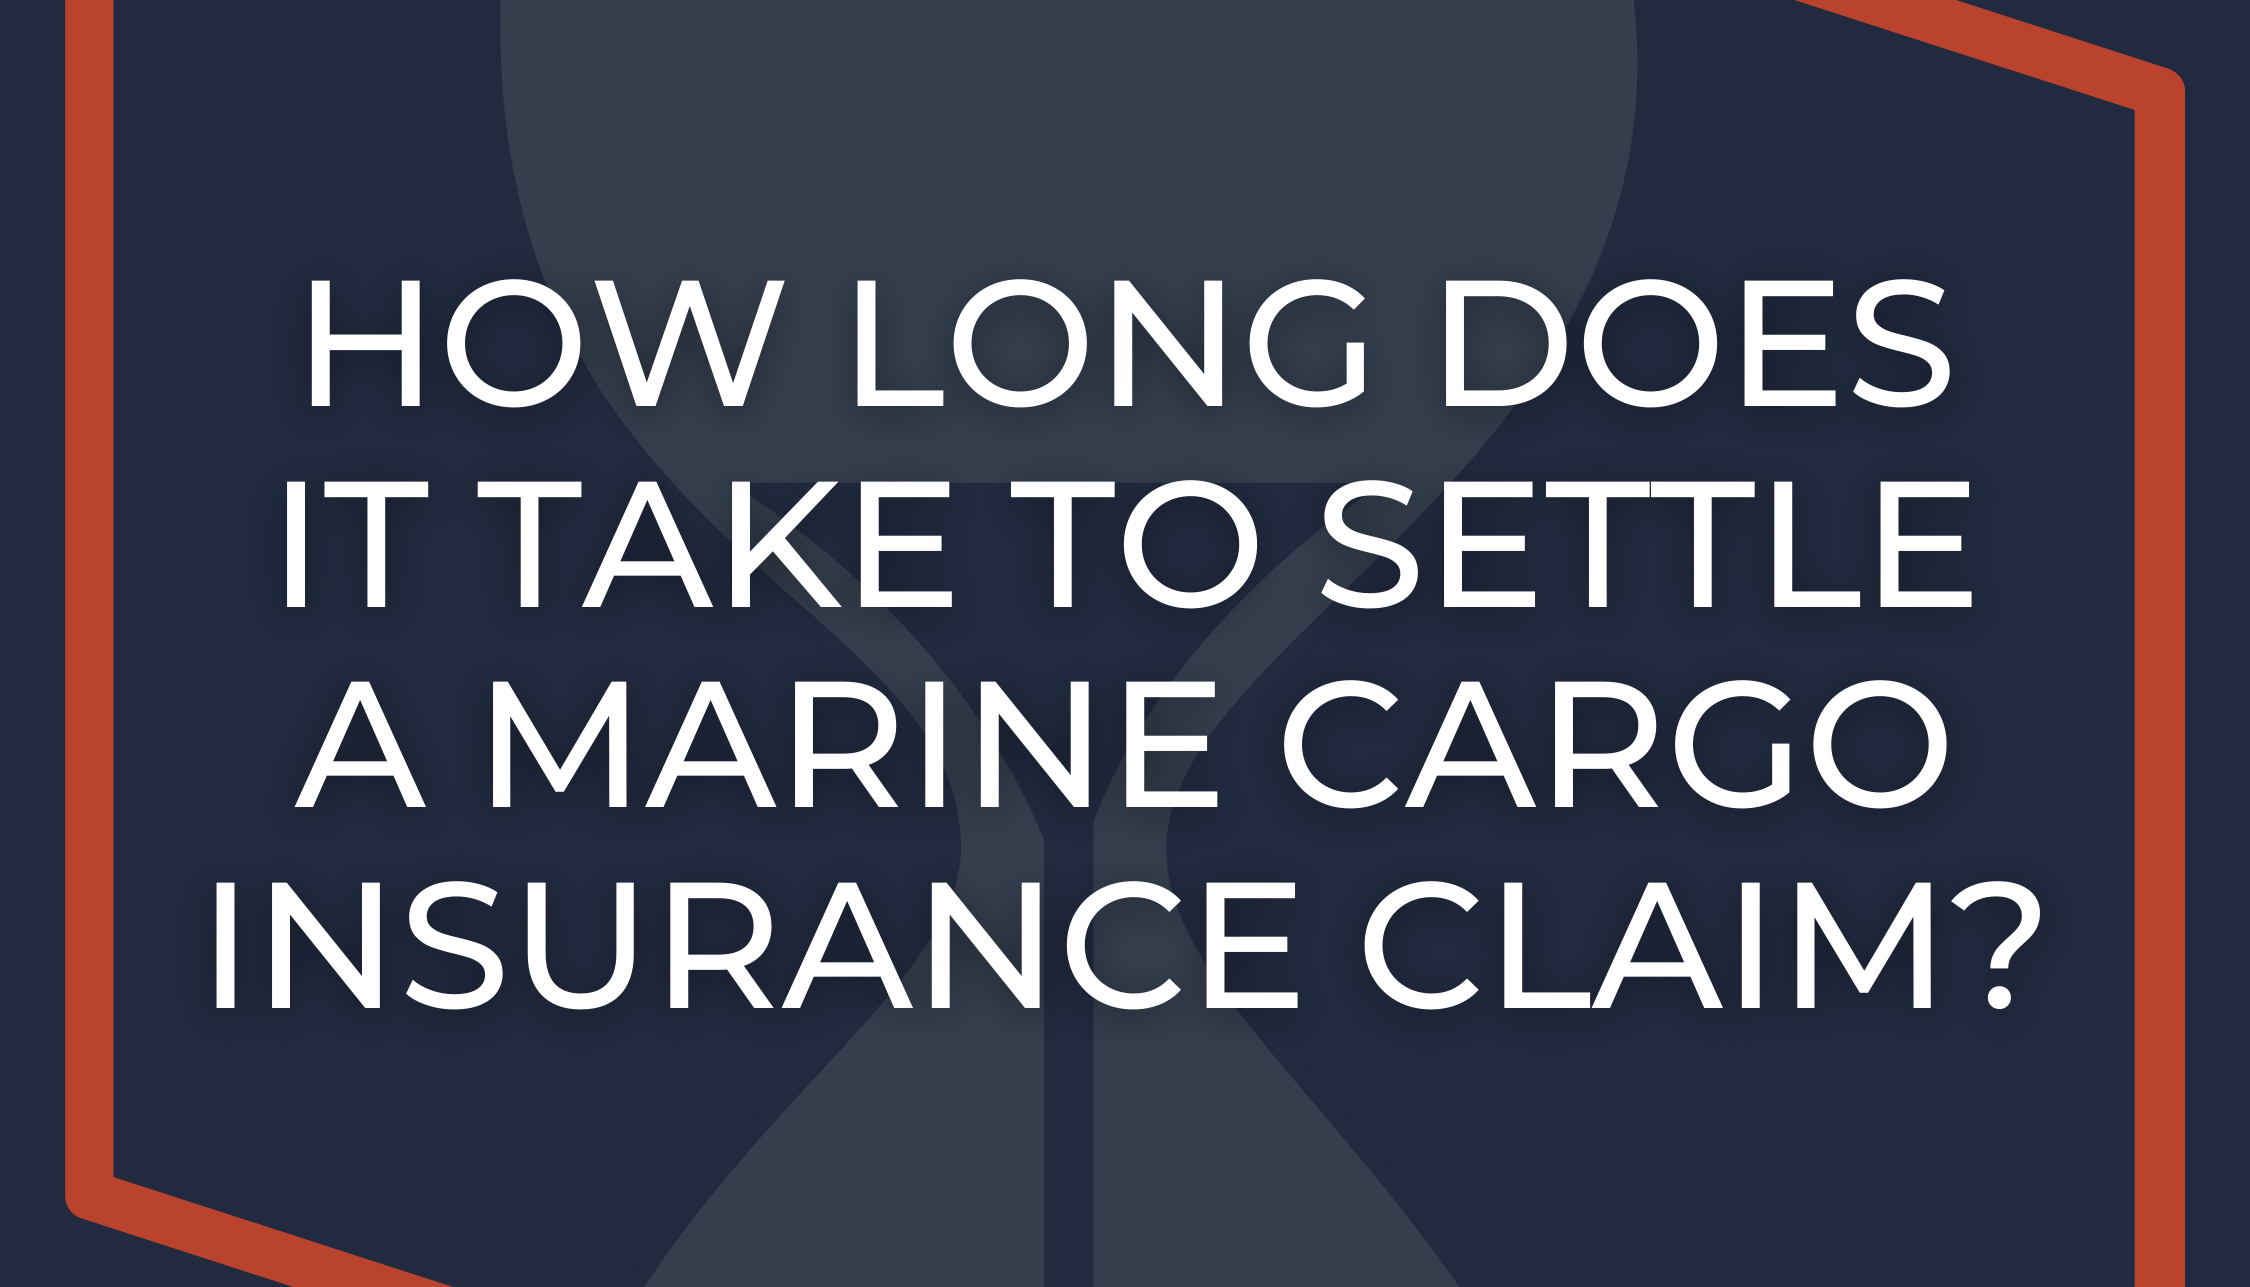 How Long Does it Take to Settle a Marine Cargo Insurance Claim?